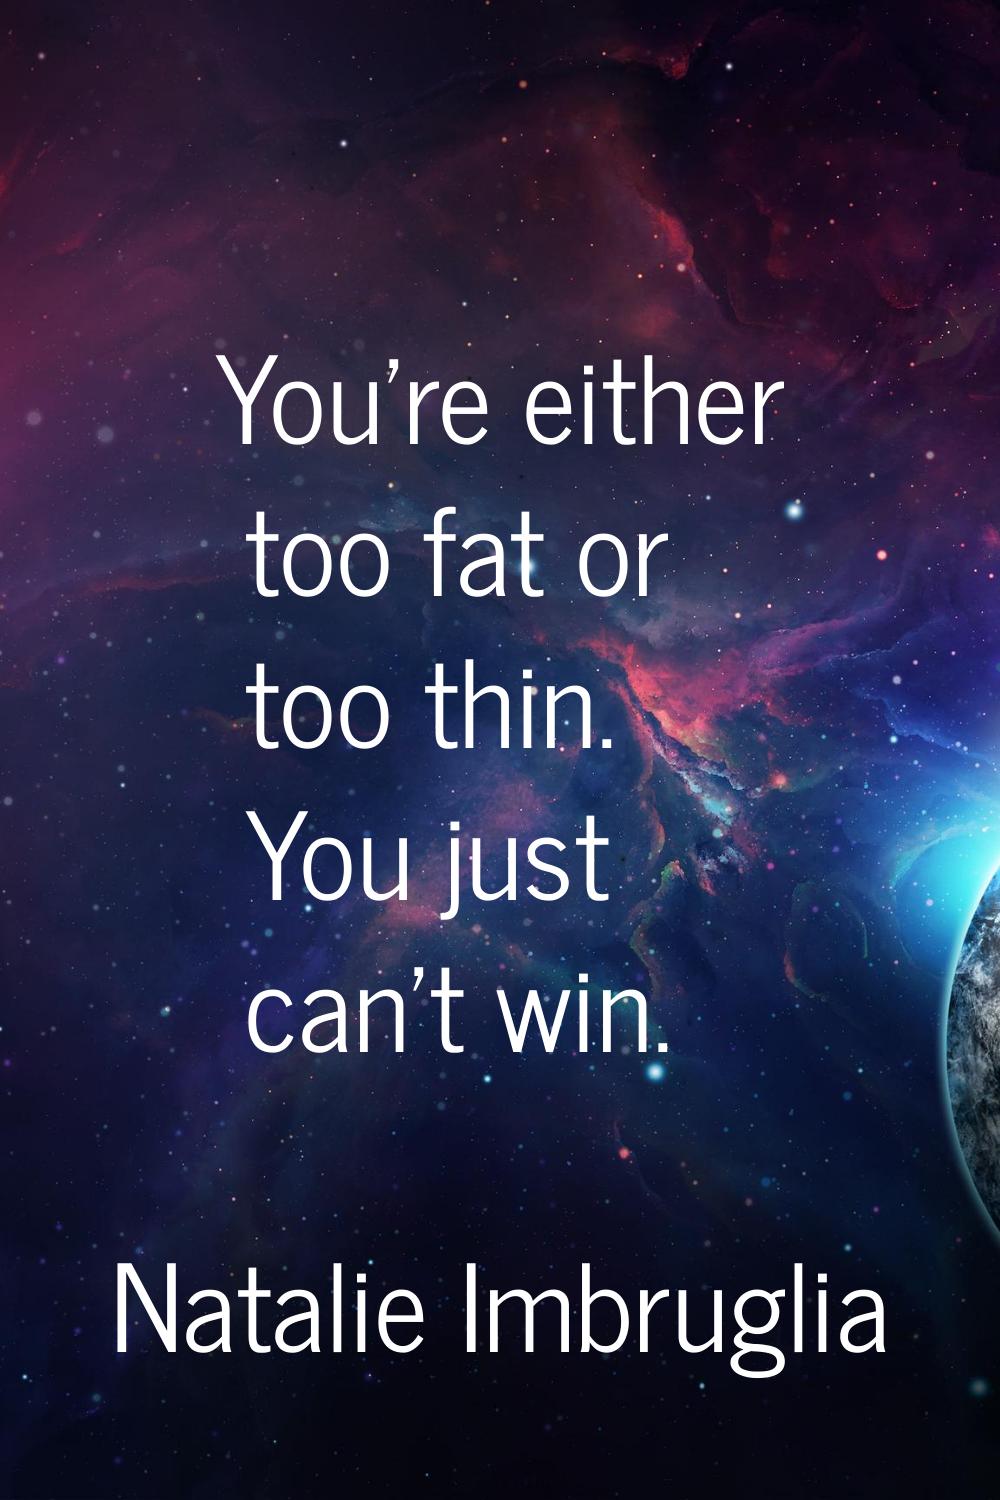 You're either too fat or too thin. You just can't win.